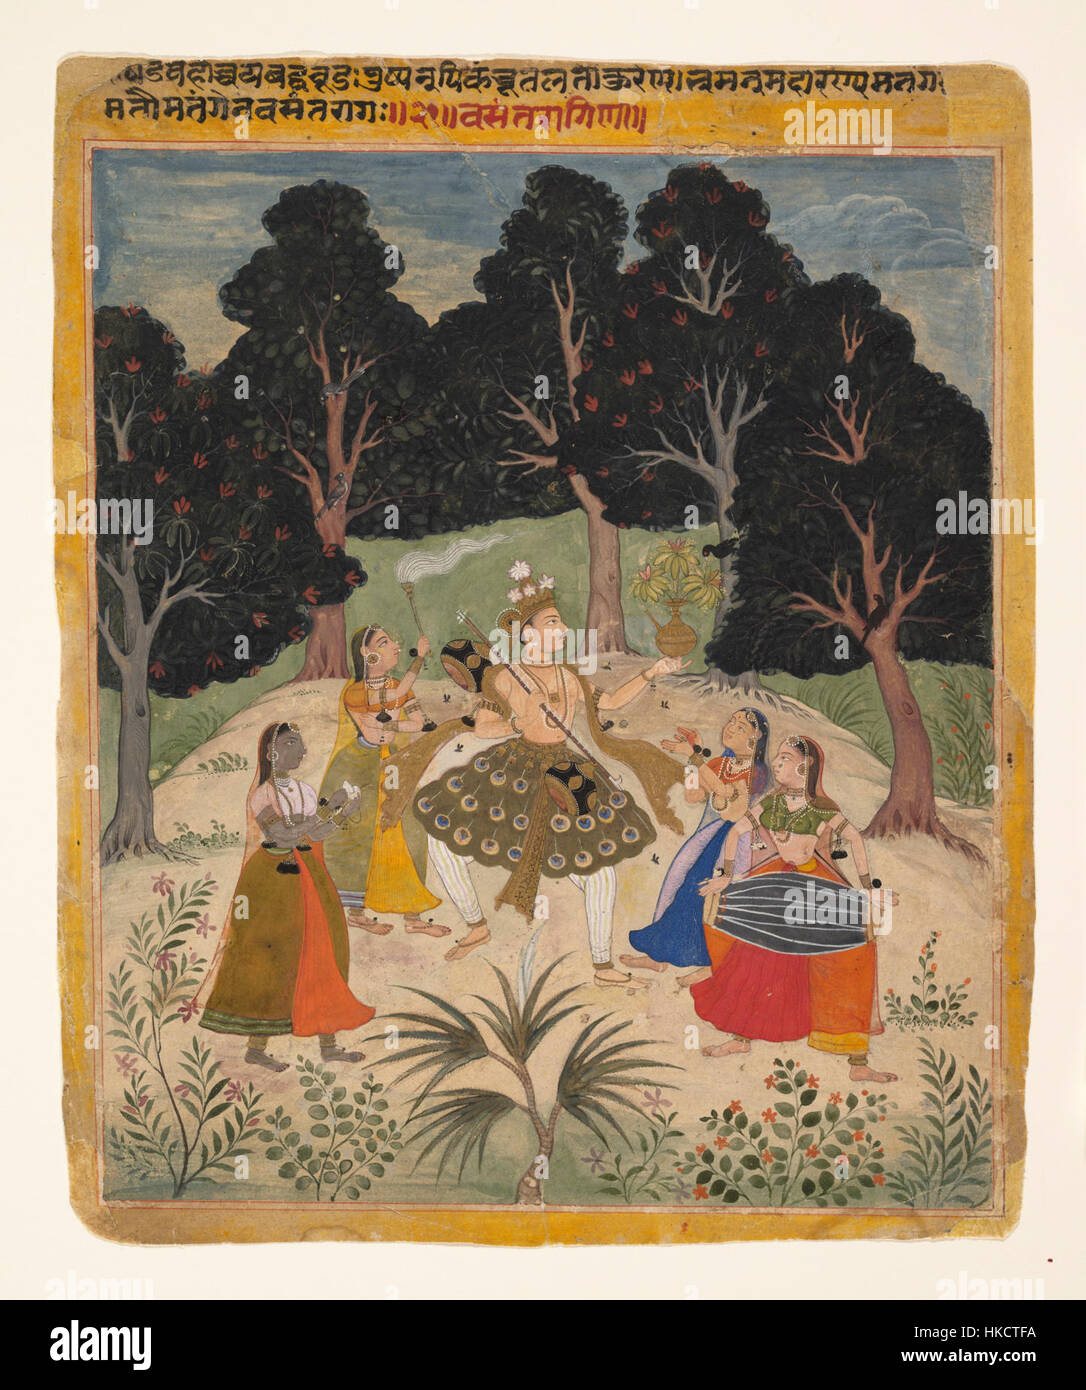 5 Vasant Ragini folio from a Ragamala Series (Garland of Musical Modes), Amber, early 17, Metmuseum Stock Photo